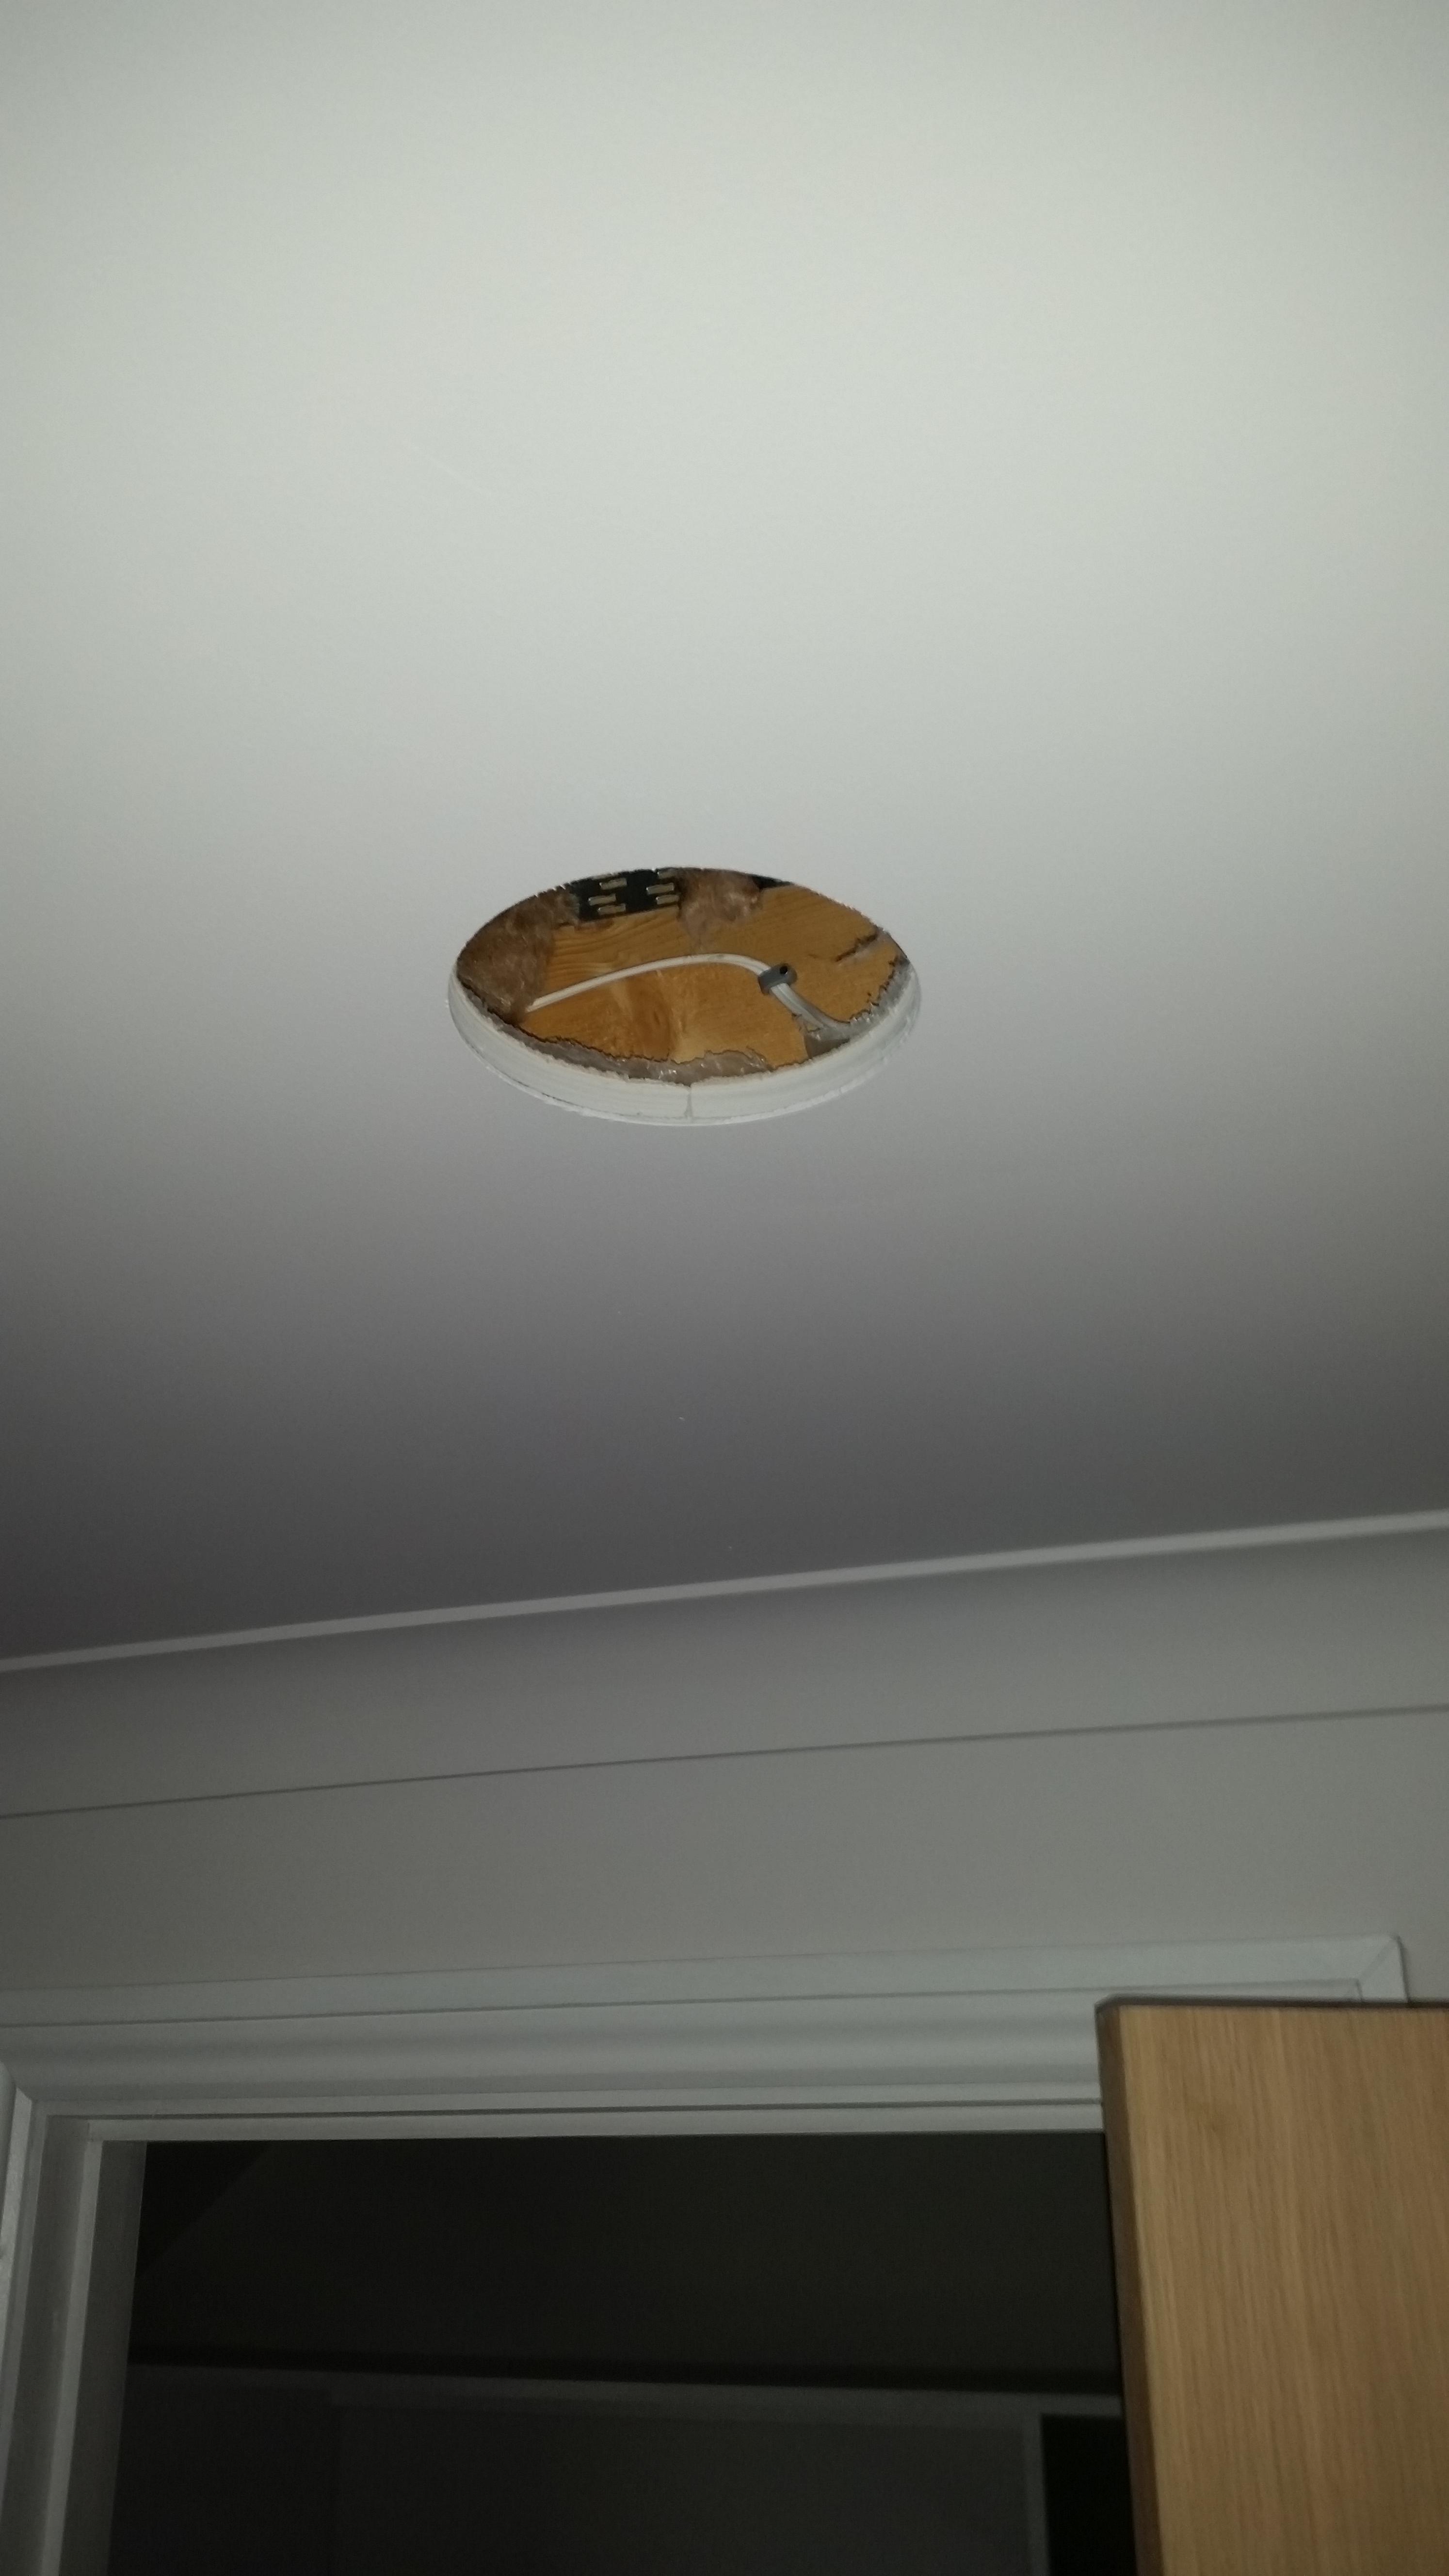 Fit all lights and speakers in the ceiling before your air test.